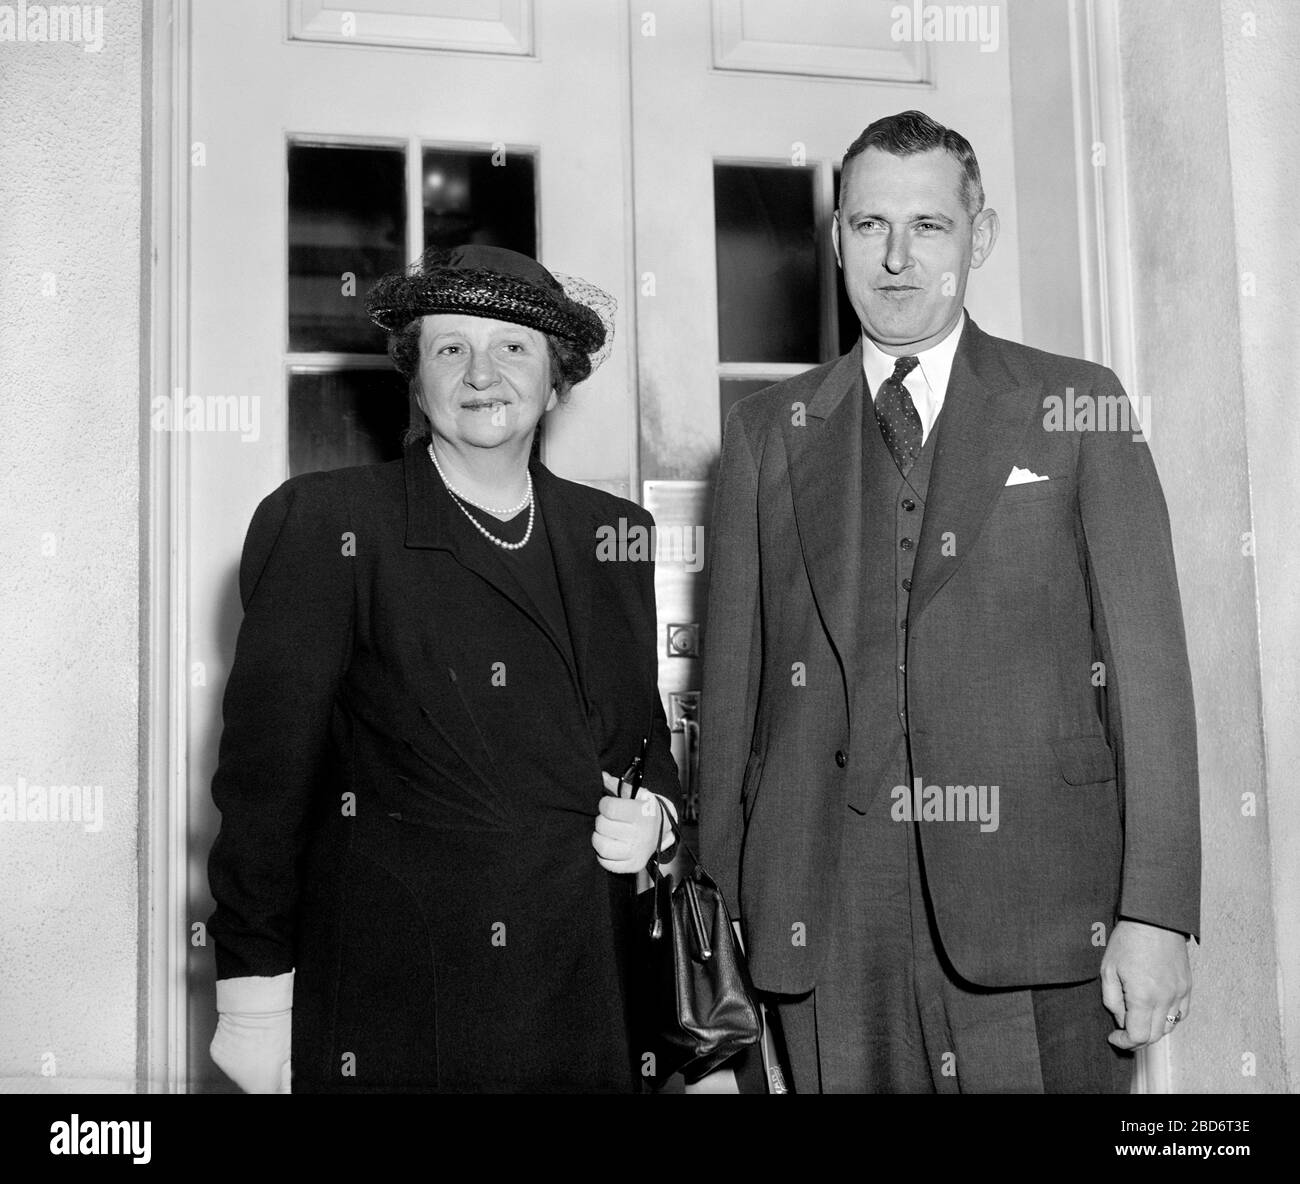 U.S. Secretary of Labor Frances Perkins and Dr. John R. Steelman, Chief of the Mediation Service, leaving White House today after Conference with U.S. President Franklin Roosevelt to discuss struggle between United Mine Workers and Harlan County, Kentucky Operators, Washington, D.C., USA, Harris & Ewing, May 17, 1939 Stock Photo